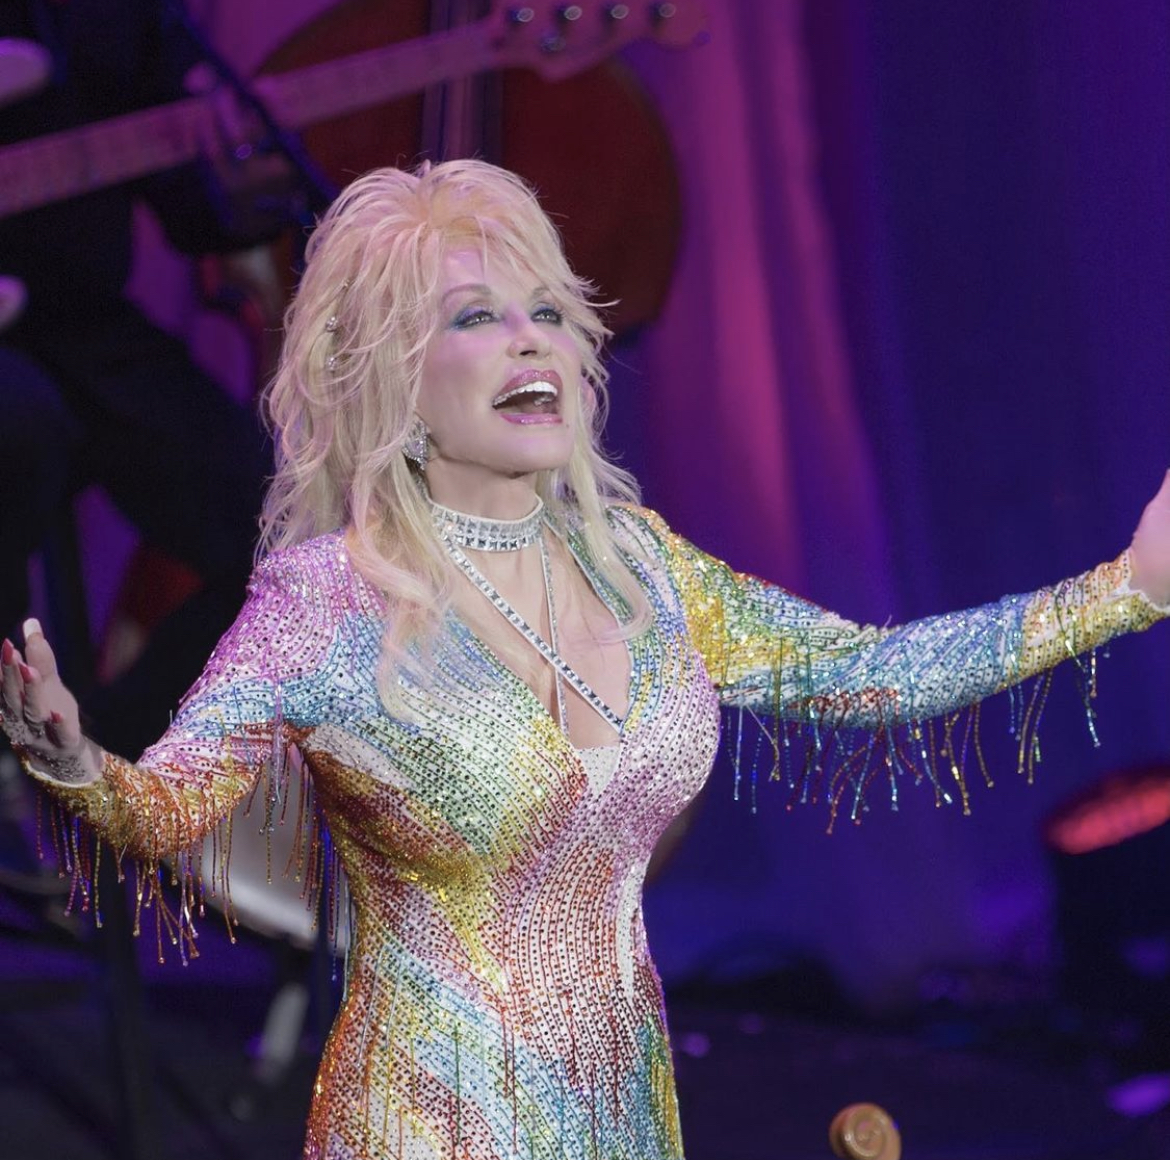 ‘It’s Not True’ - Dolly Parton Addresses Age-Long Rumour About Insuring Her Breasts